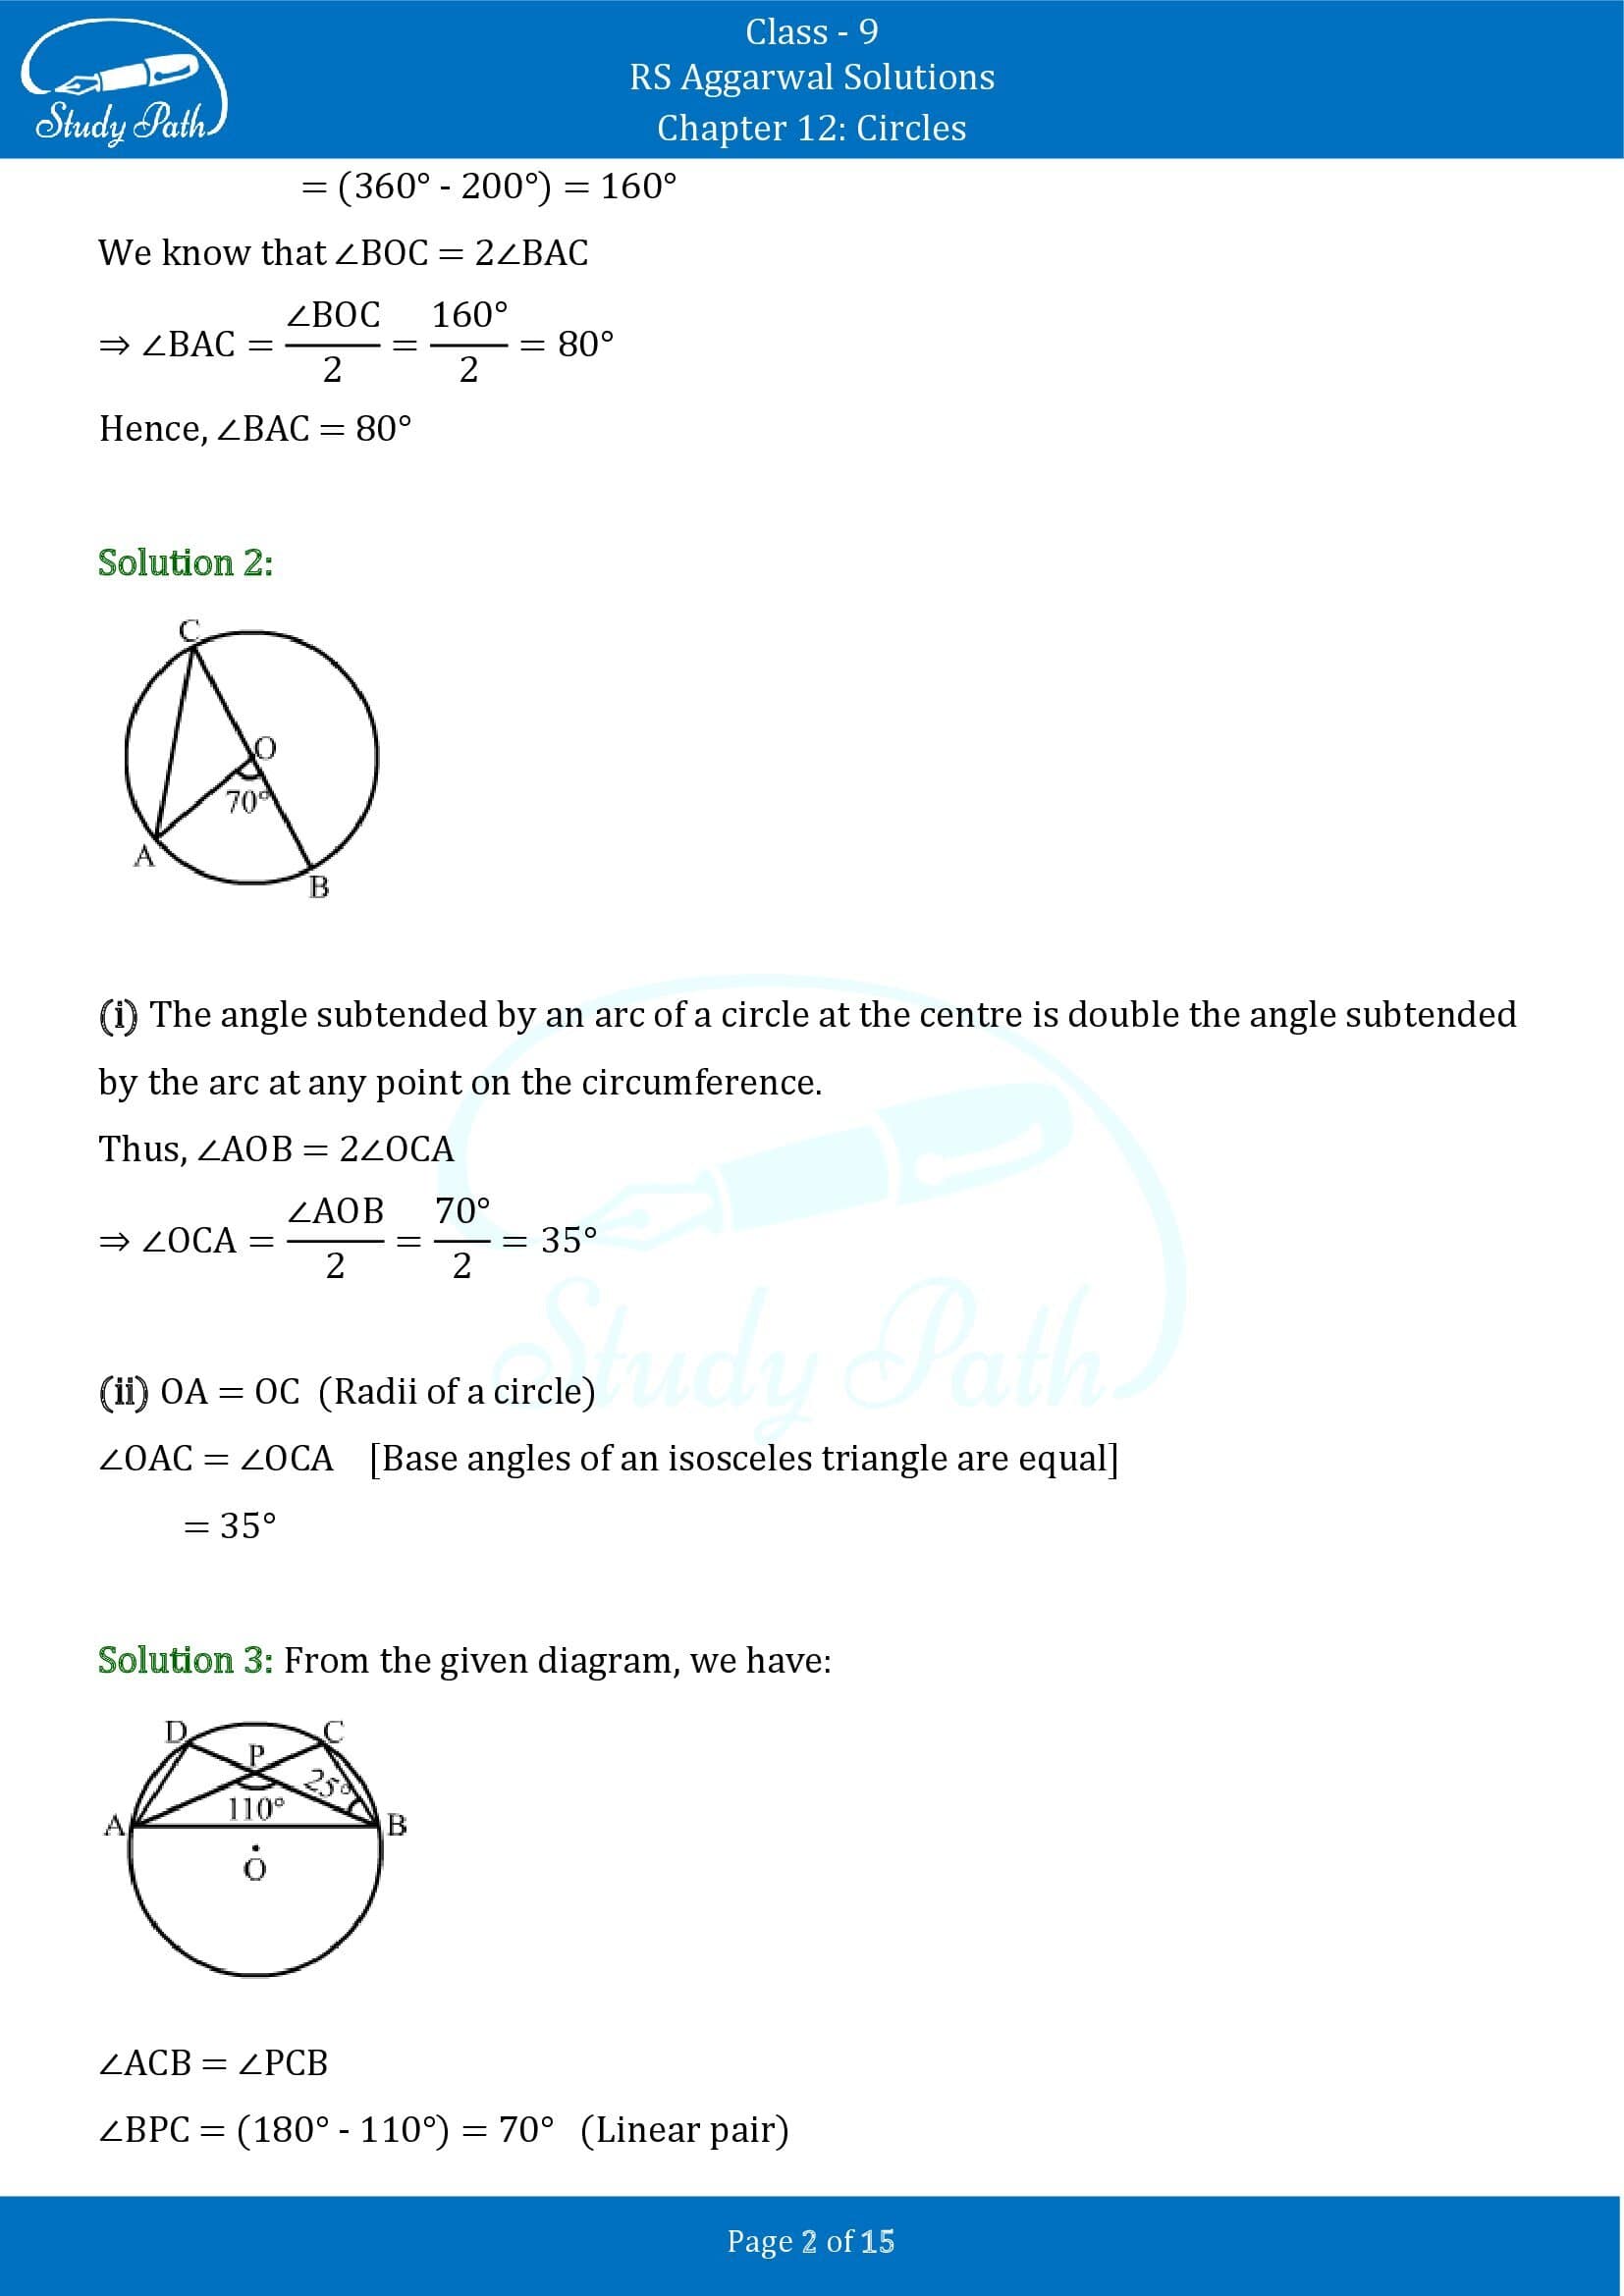 RS Aggarwal Solutions Class 9 Chapter 12 Circles Exercise 12B 00002